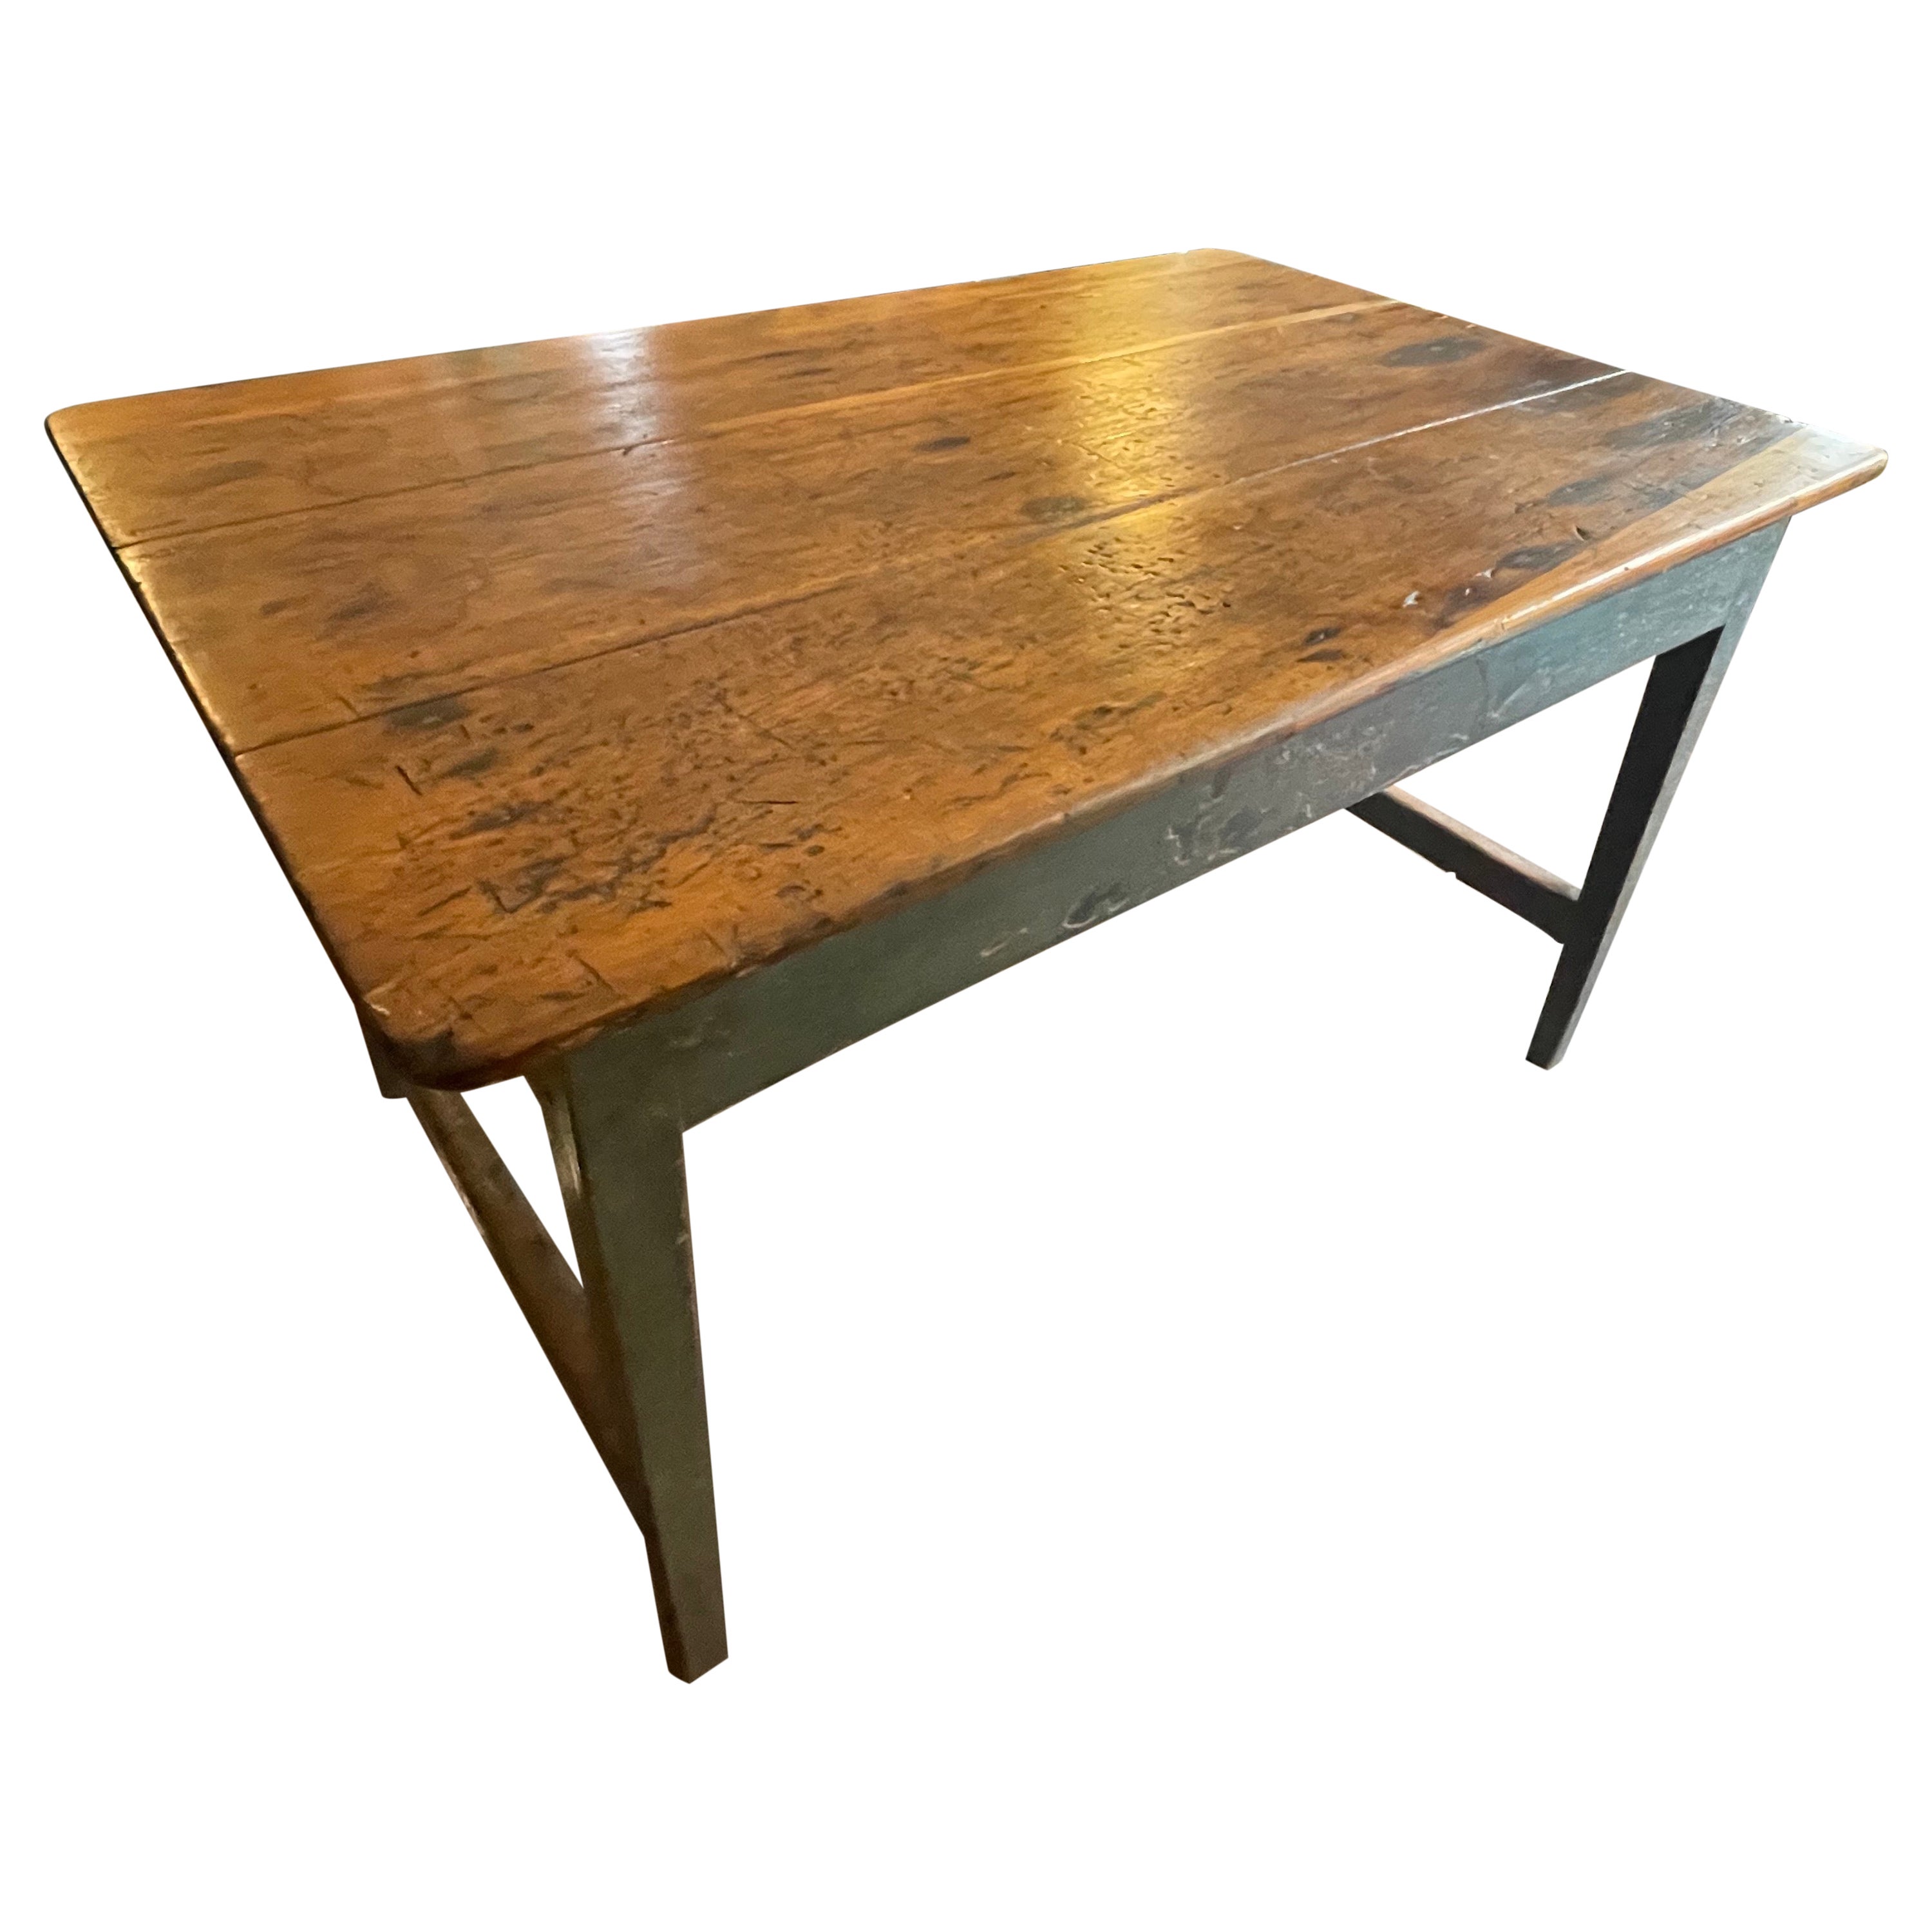 19th Century Pine Table with Painted Base